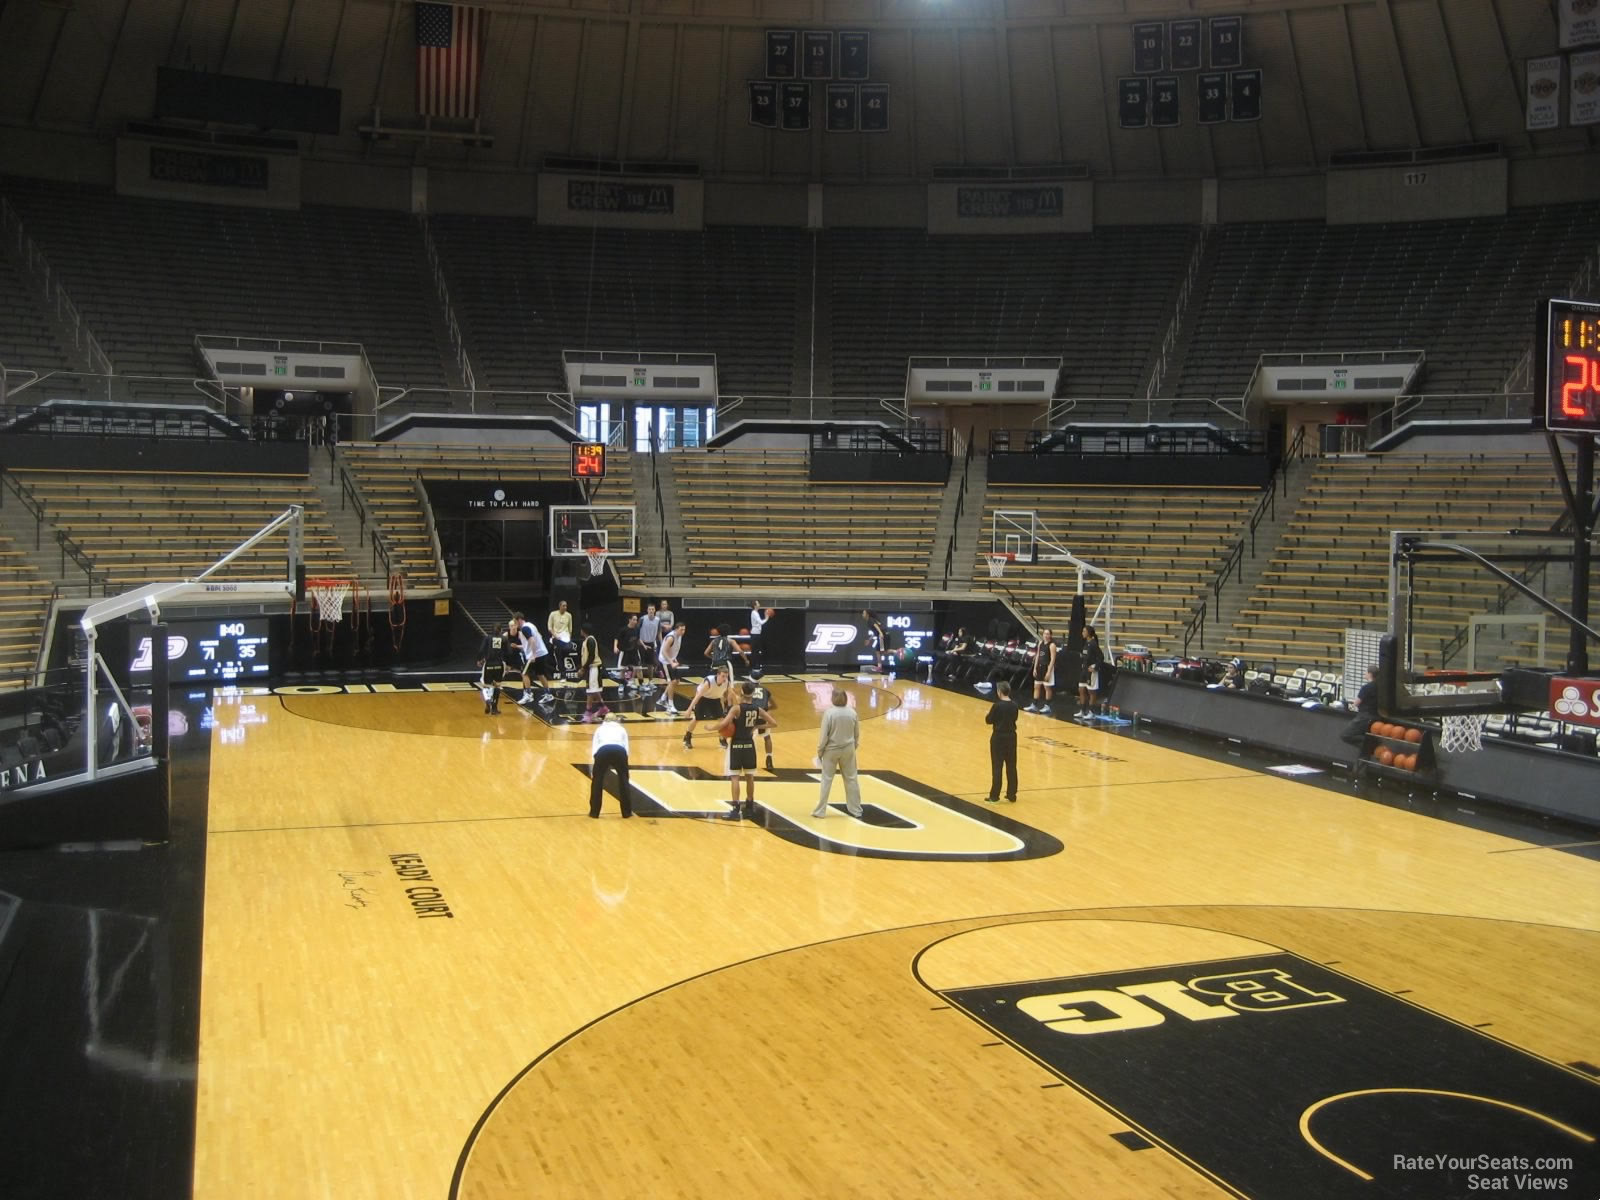 section 6, row 10 seat view  - mackey arena